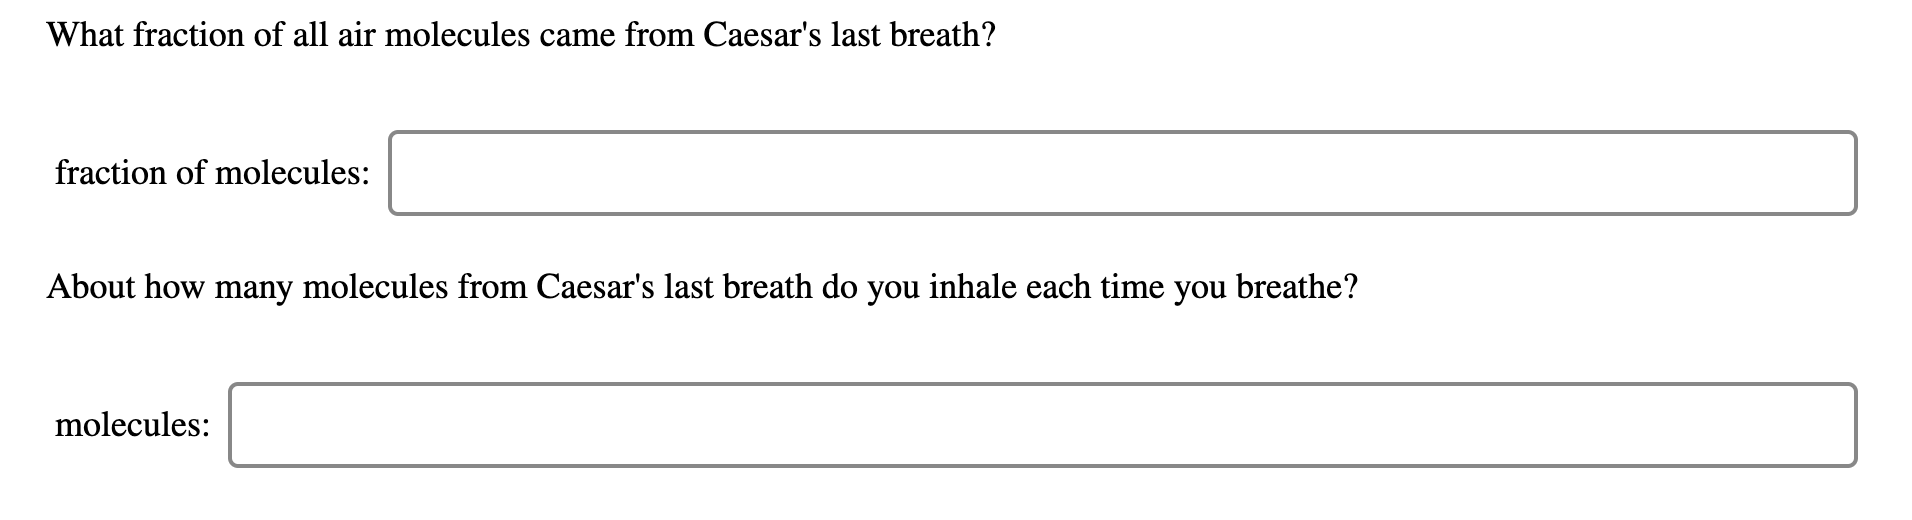 What fraction of all air molecules came from Caesar's last breath?
fraction of molecules:
About how many molecules from Caesar's last breath do you inhale each time you breathe?
molecules:
